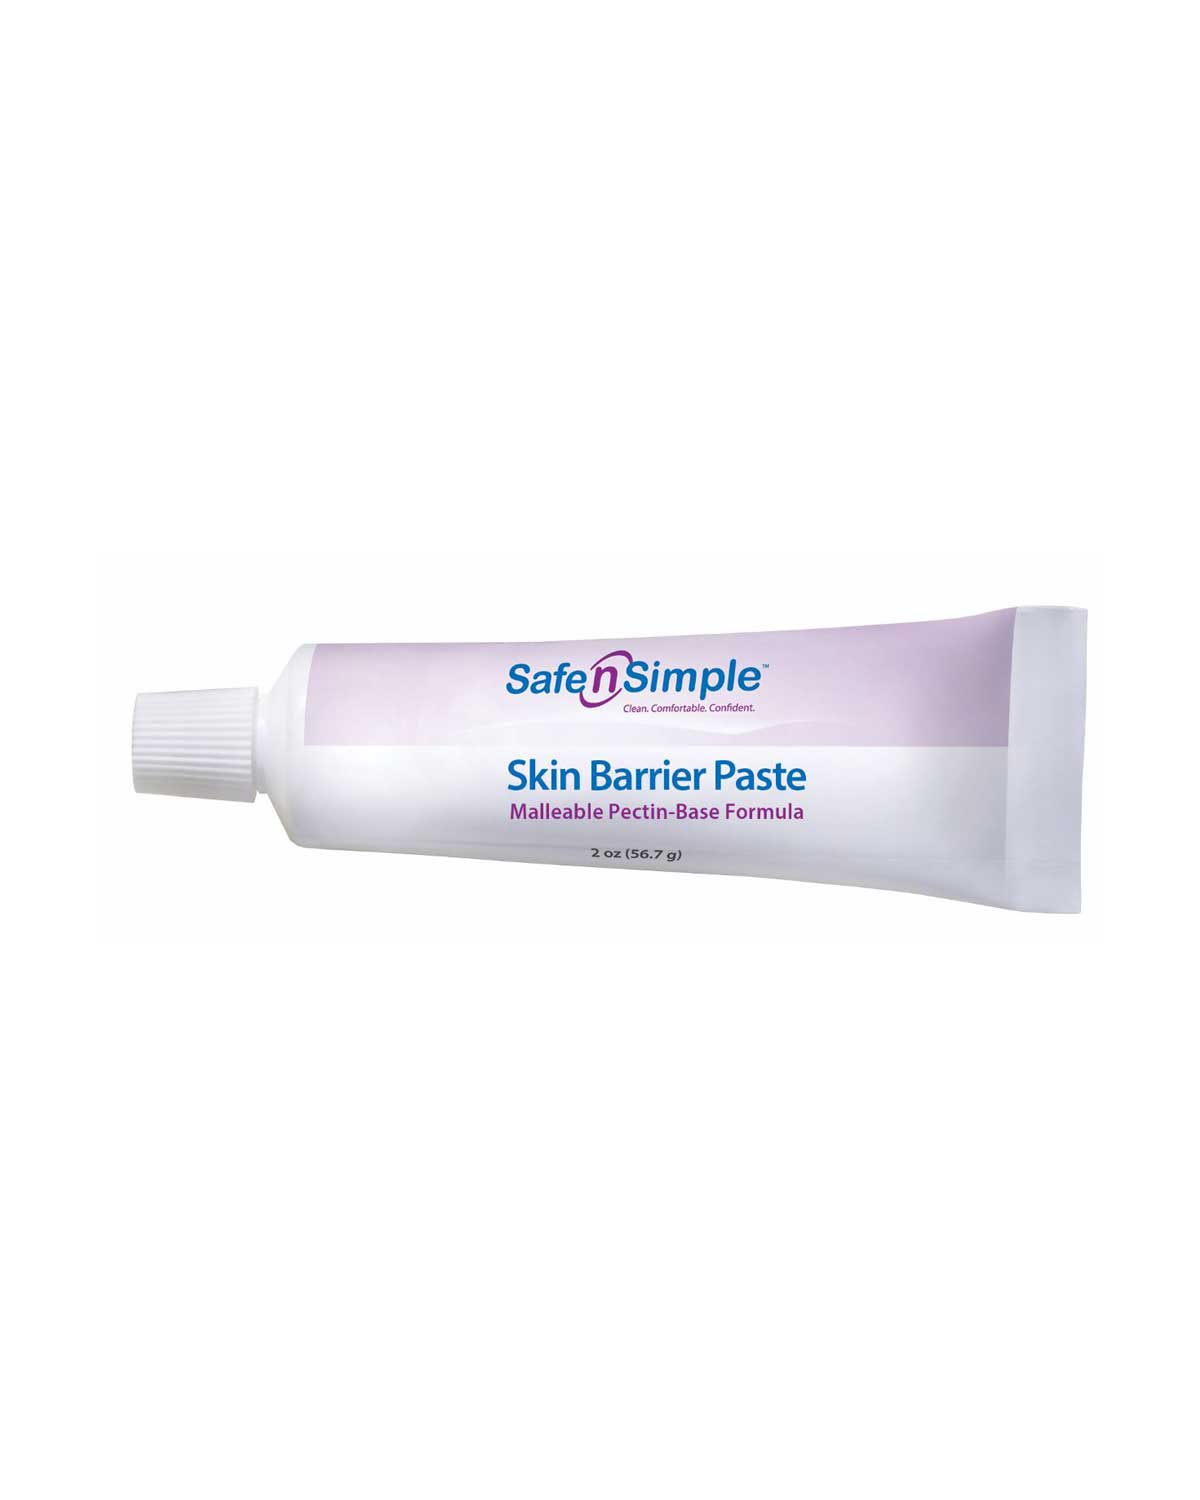 Safe n Simple Skin Barrier Paste (contains alcohol) 2 oz Tube - 1 each